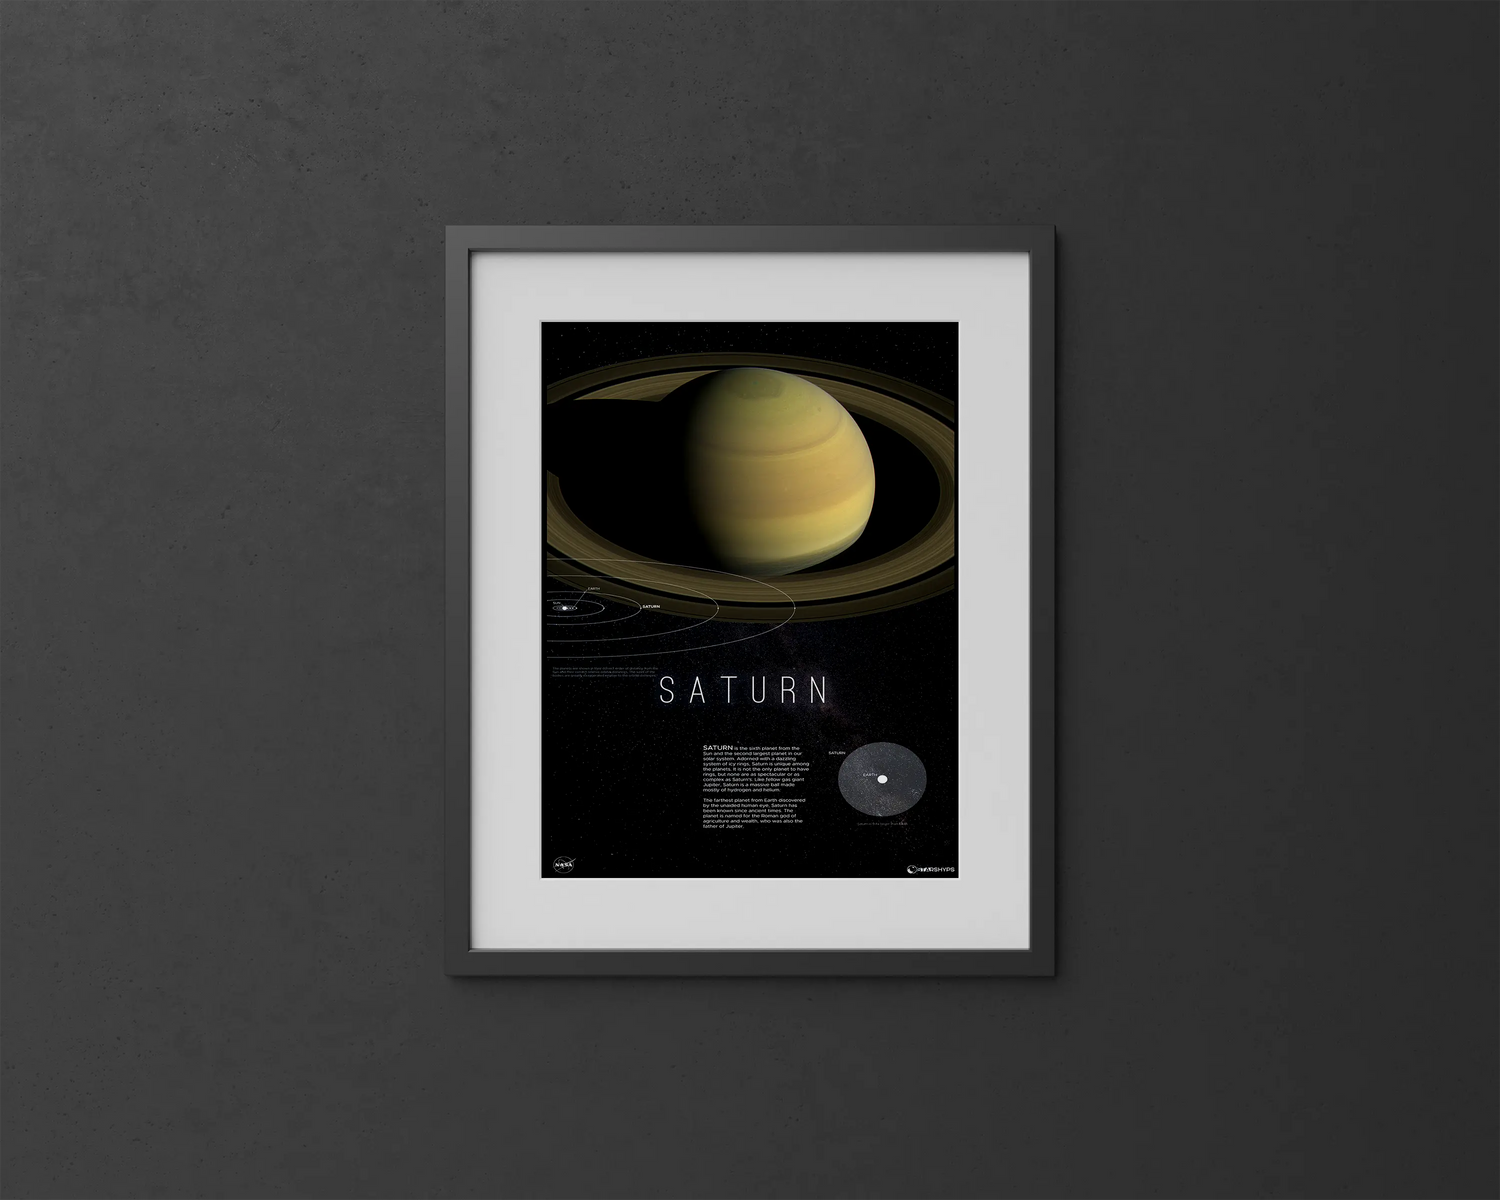 Saturn's Rings Decor | Saturn Print | Rocket Blueprint Posters | A framed poster of Saturn with its iconic rings hangs on a dark wall. The title "SATURN" is at the bottom, along with descriptive text about the planet and a diagram comparing Saturn's size to Earth.